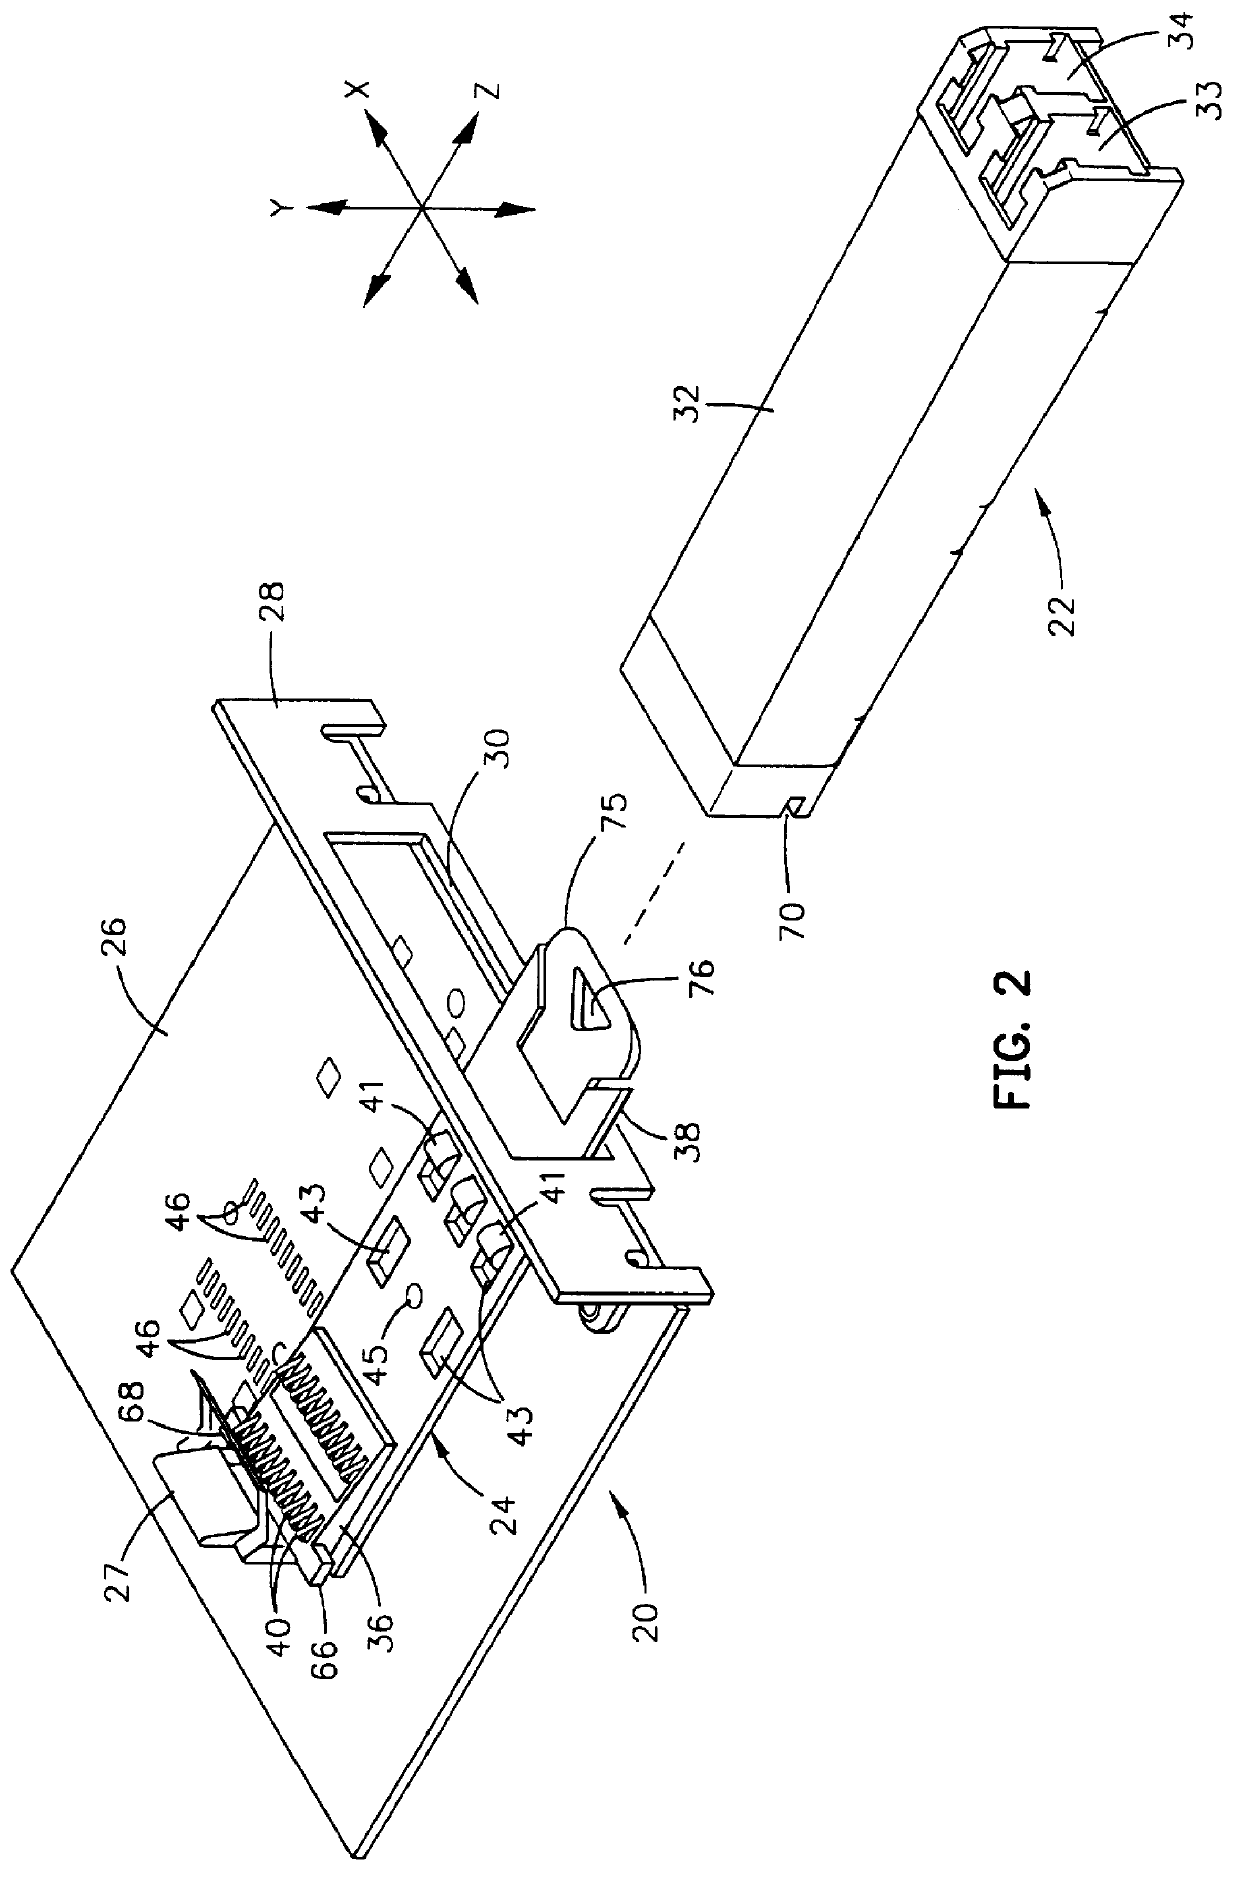 Guide rail system with integrated wedge connector for removable transceiver